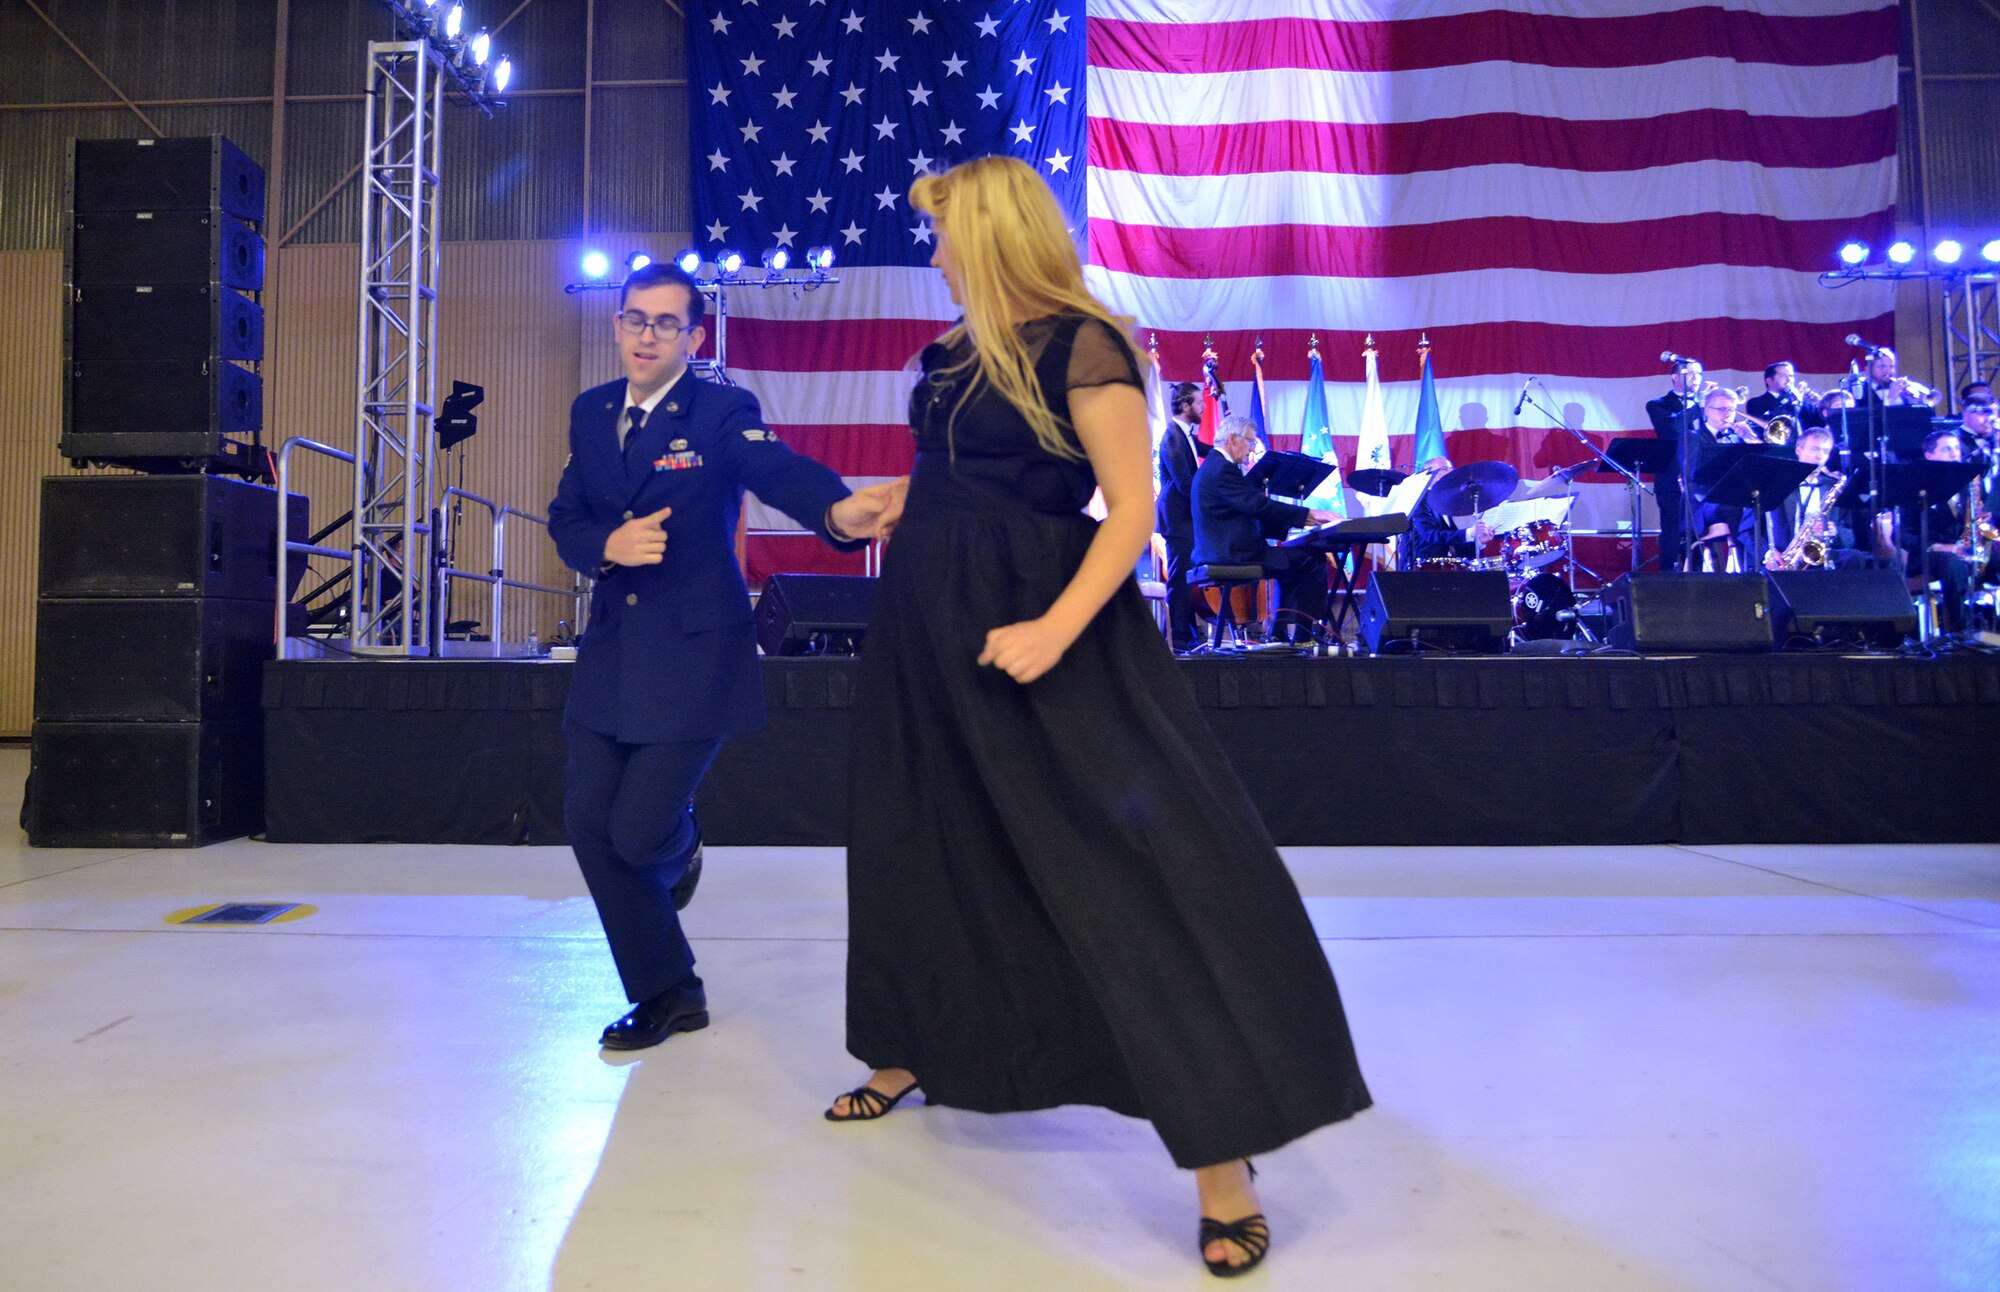 Senior Airman Jeffrey Whitlock and his swing partner dance the night away at an April 16 banquet celebrating Kirtland's 75th anniversary. About 500 people attended the banquet at the New Mexico Air National Guard’s 150th Special Operations Wing hangar. The banquet had a 1940s theme, to remember the opening of Albuquerque Army Air Base on Jan. 7, 1941. Period attire and static displays of World War II vehicles helped bring the theme to life. (Photo by Todd Berenger)